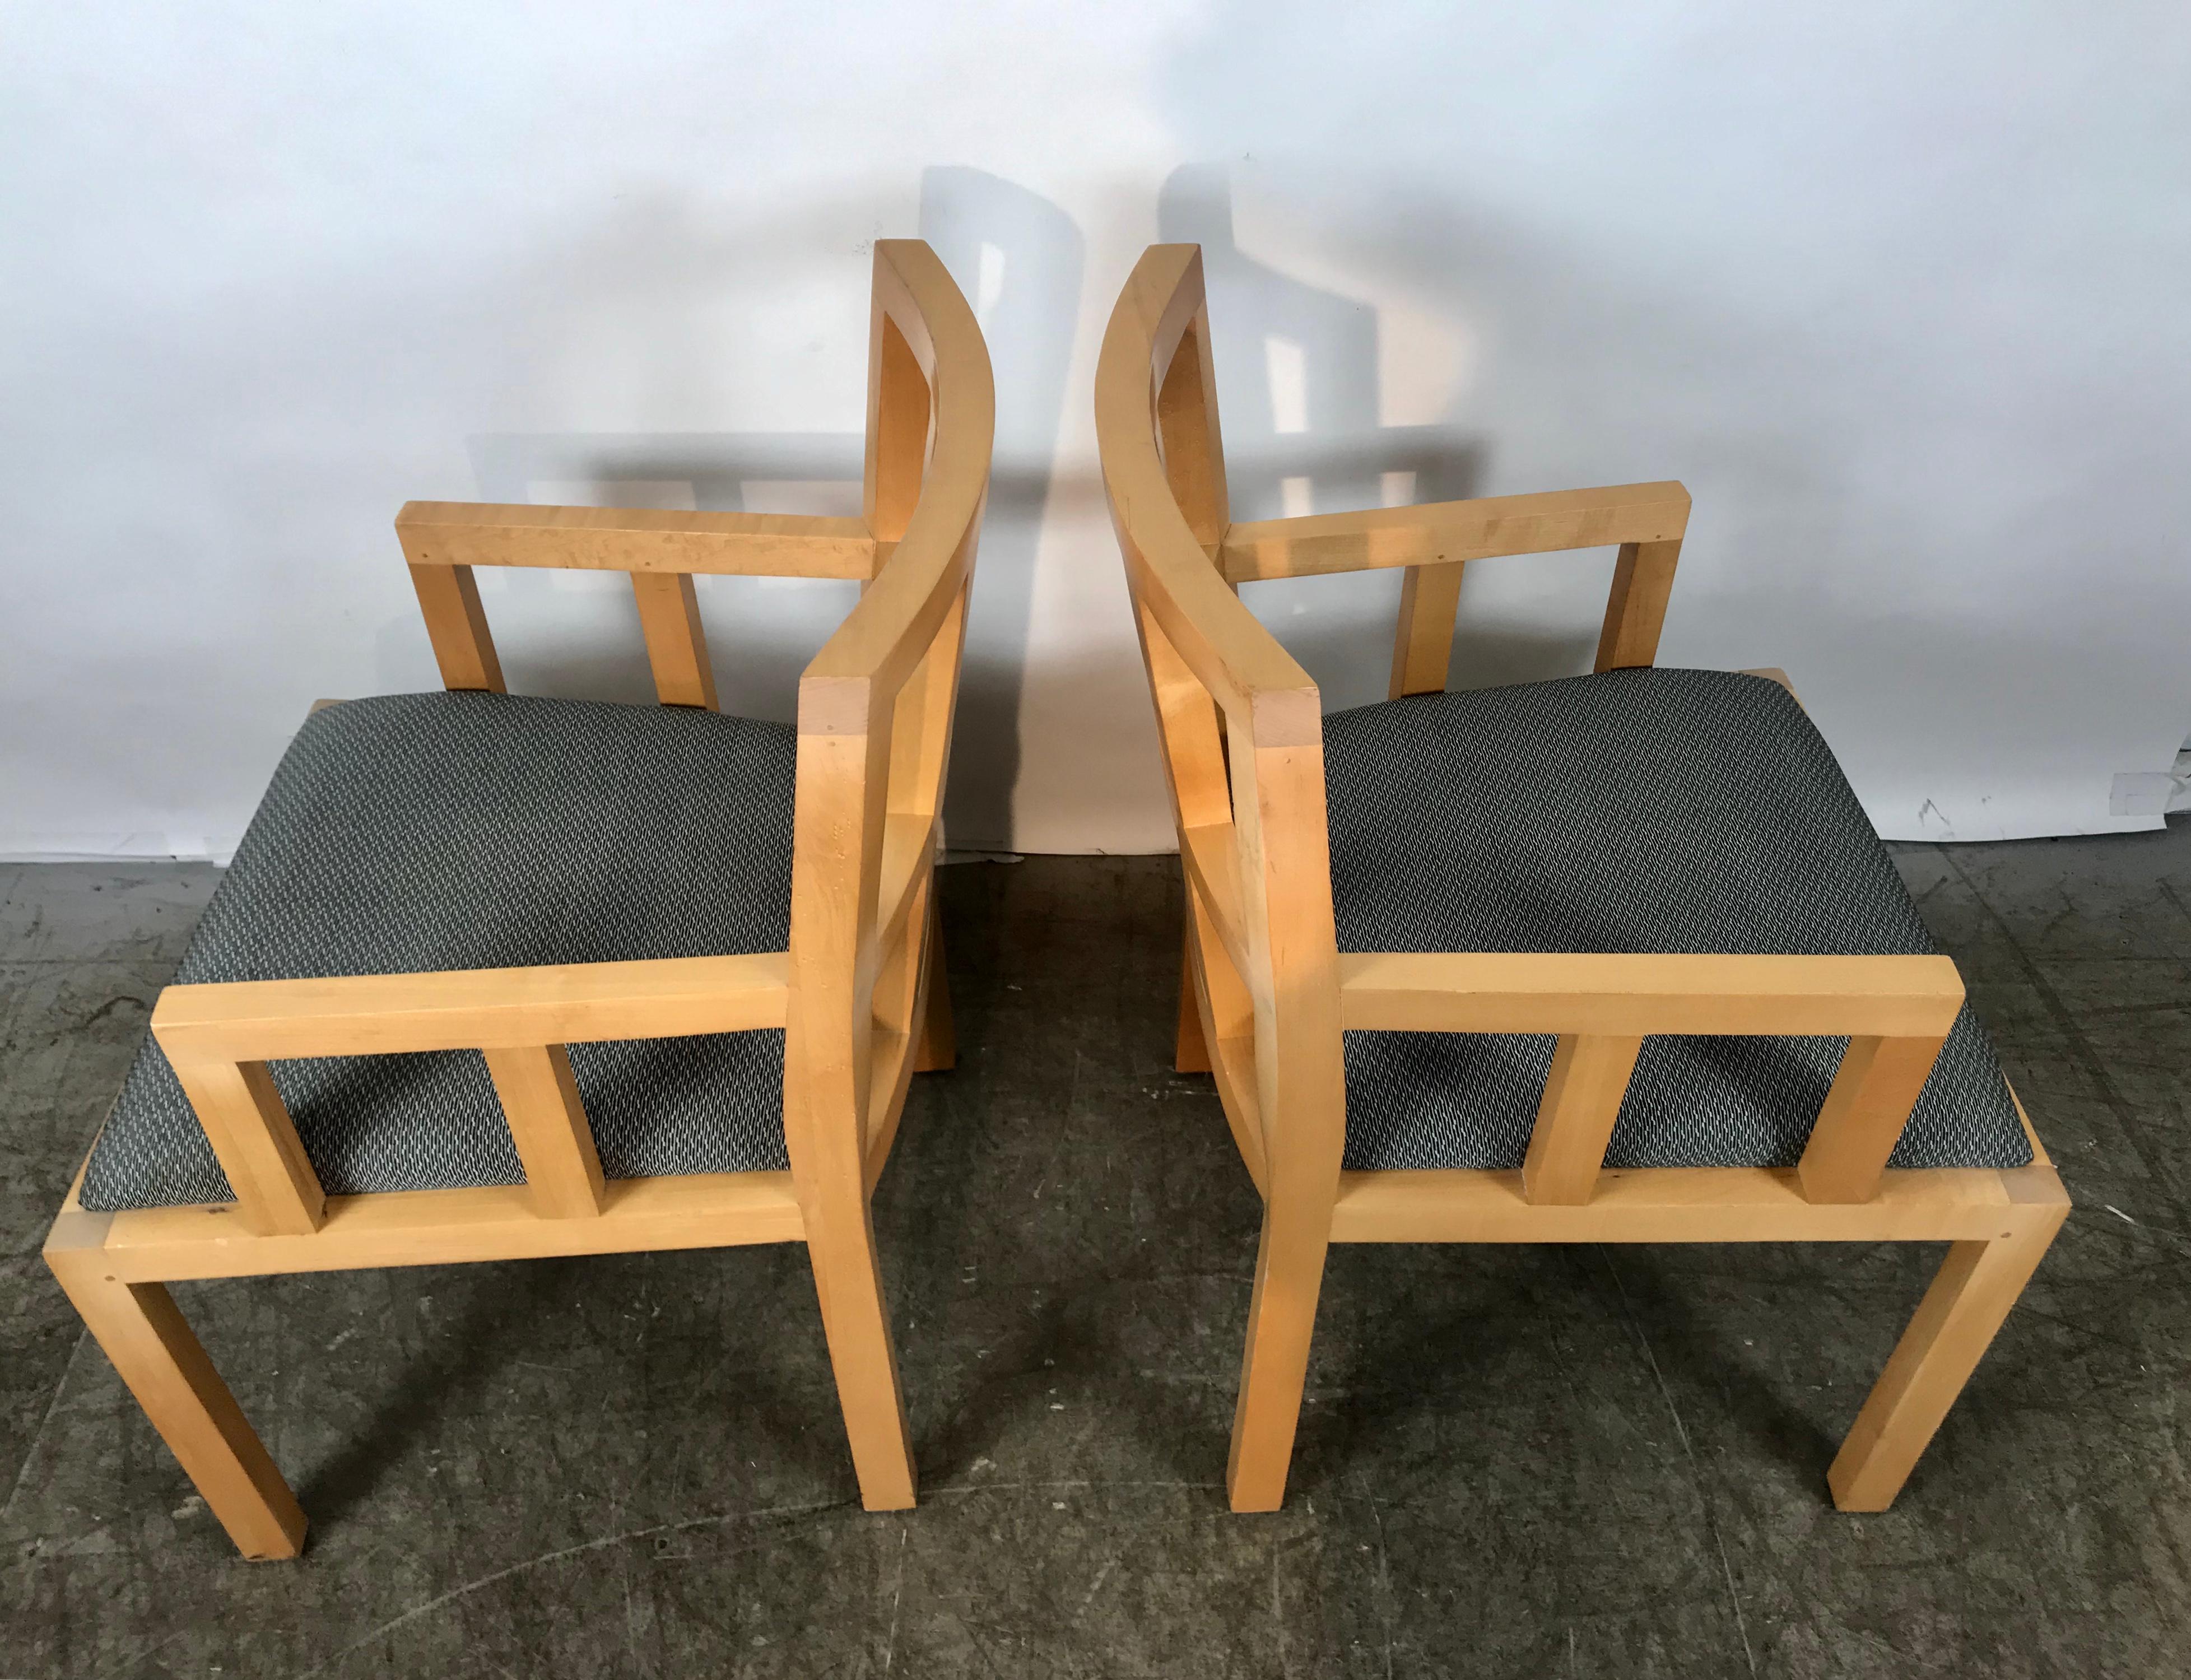 Stunning Pair of Contemporary Modern Birch Arm Chairs, Bernhardt Furniture Co. In Excellent Condition For Sale In Buffalo, NY